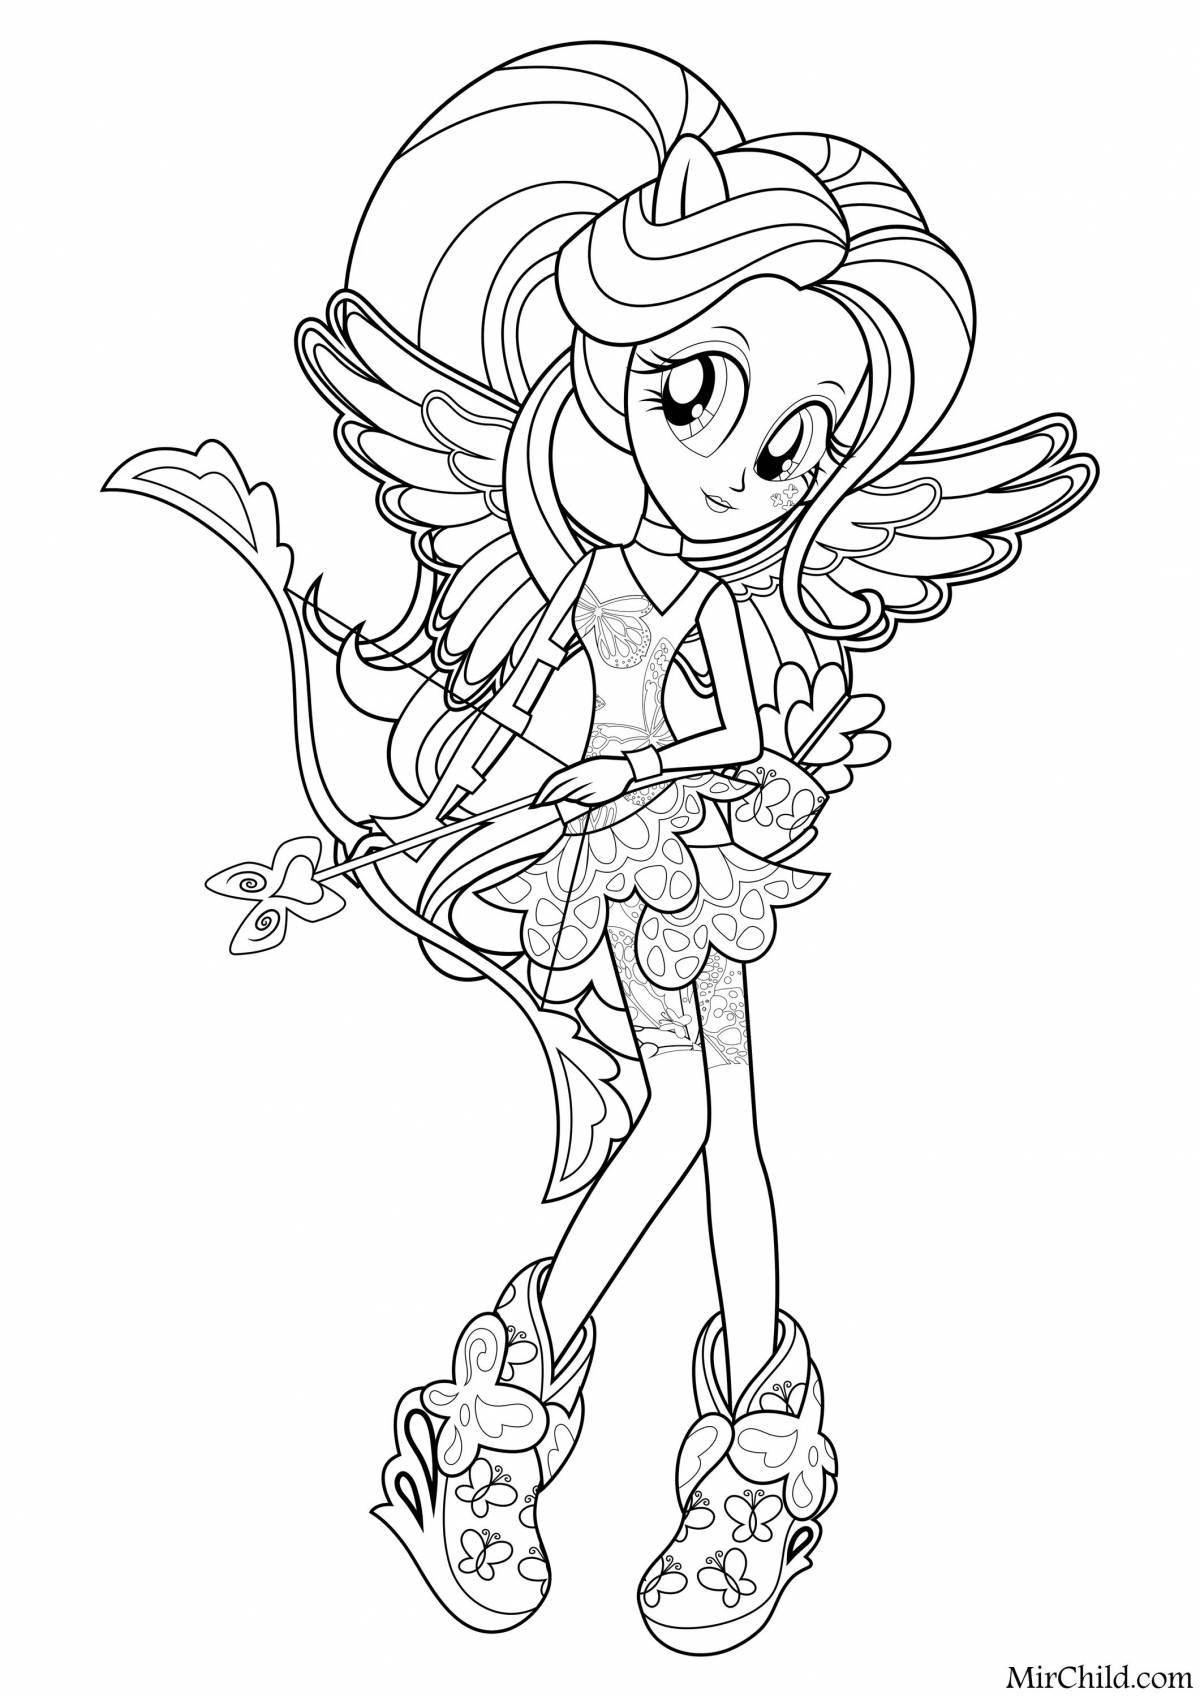 Colorful pony doll coloring page